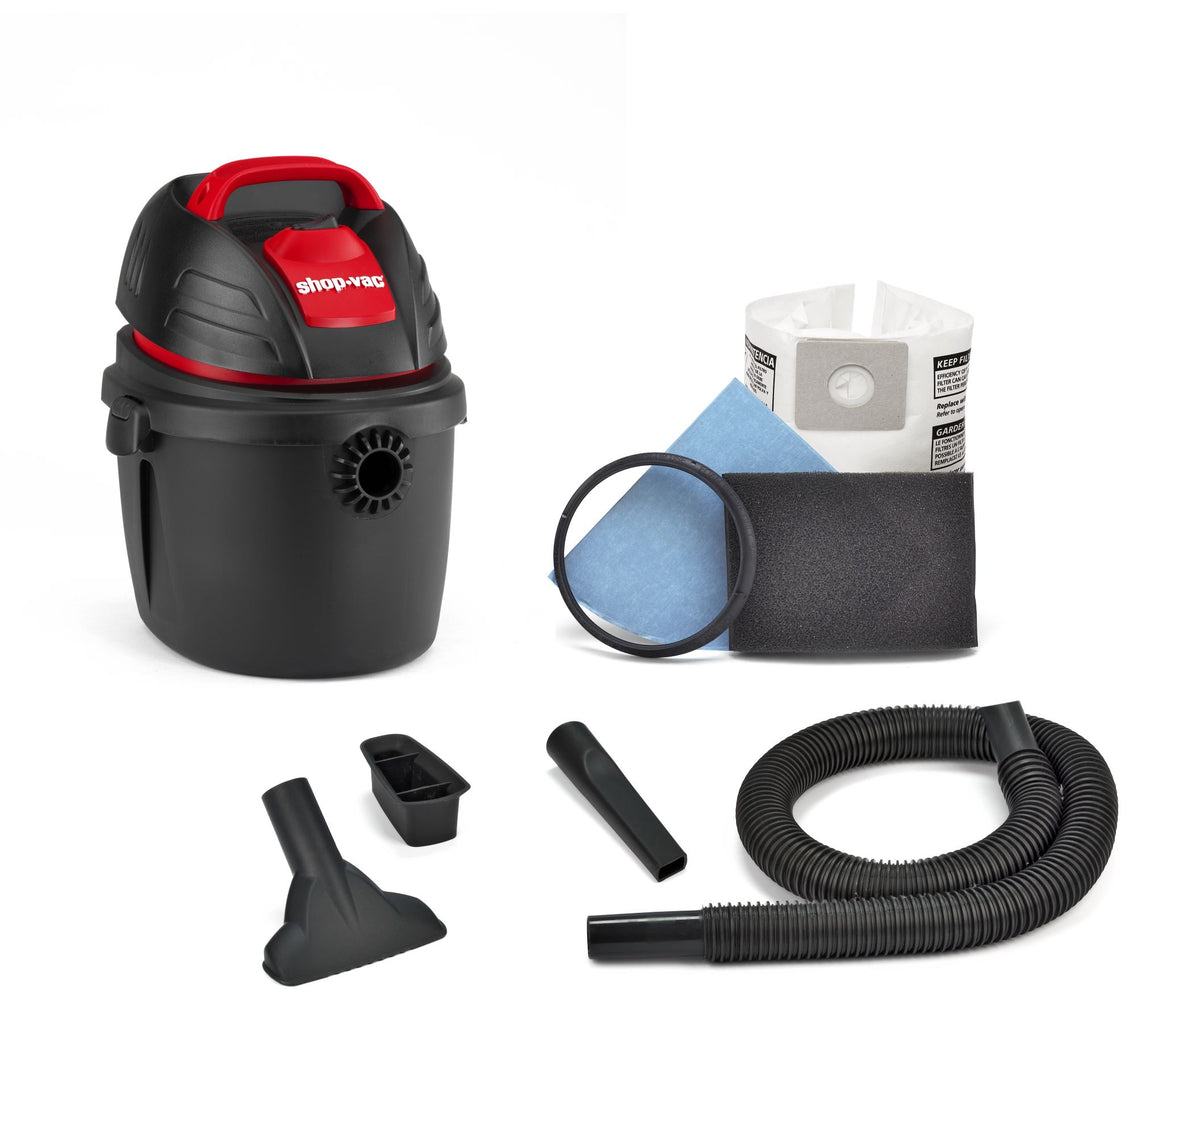 Shop-Vac 1.5 Gallon 2.0 Peak Wet Dry Vacuum, Portable Compact Shop Vacuum  with Collapsible Handle Wall Bracket & Attachments, ‎2030100